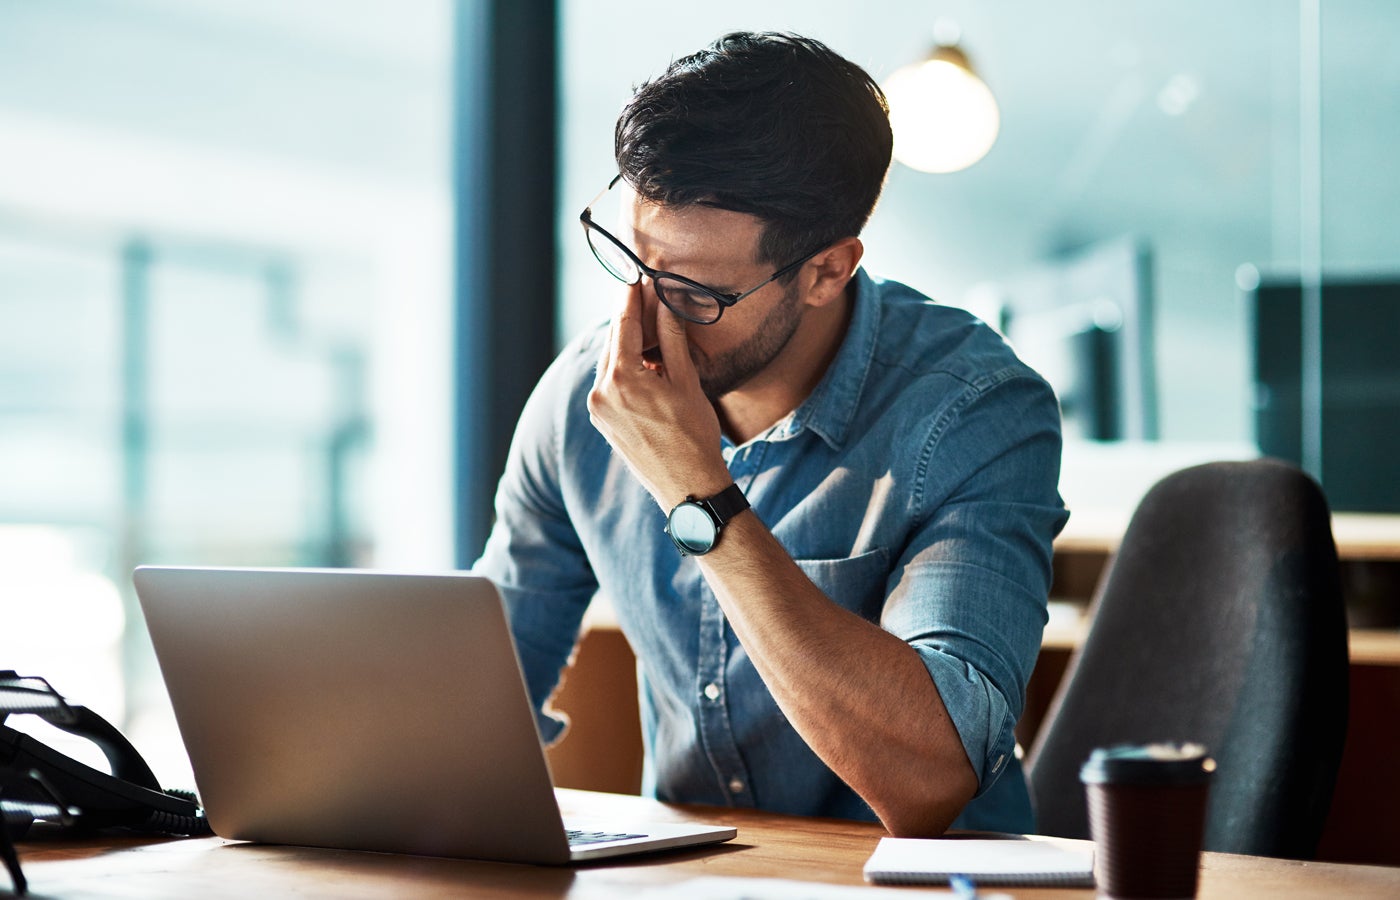 Cybersecurity professional burnout is widespread, creating risks for APAC organizations